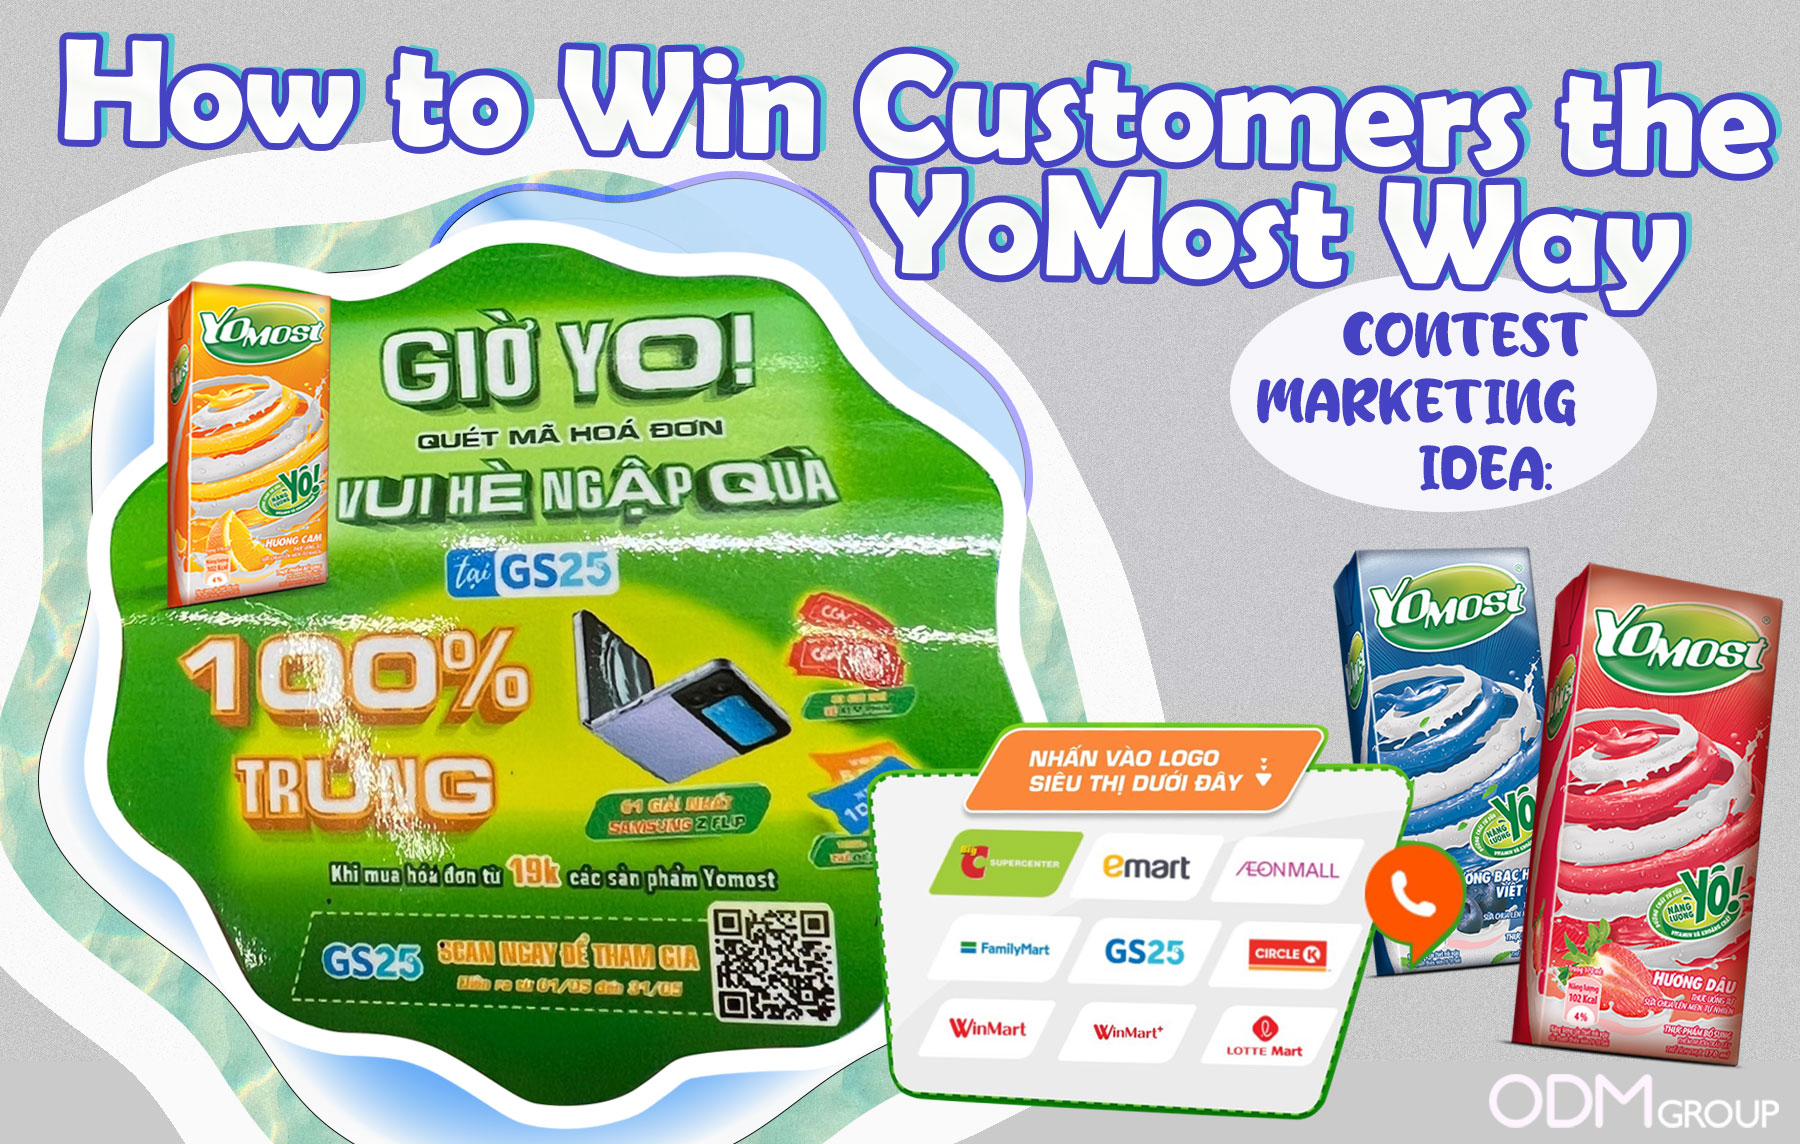 YoMost contest marketing poster promoting product purchase and participation instructions.